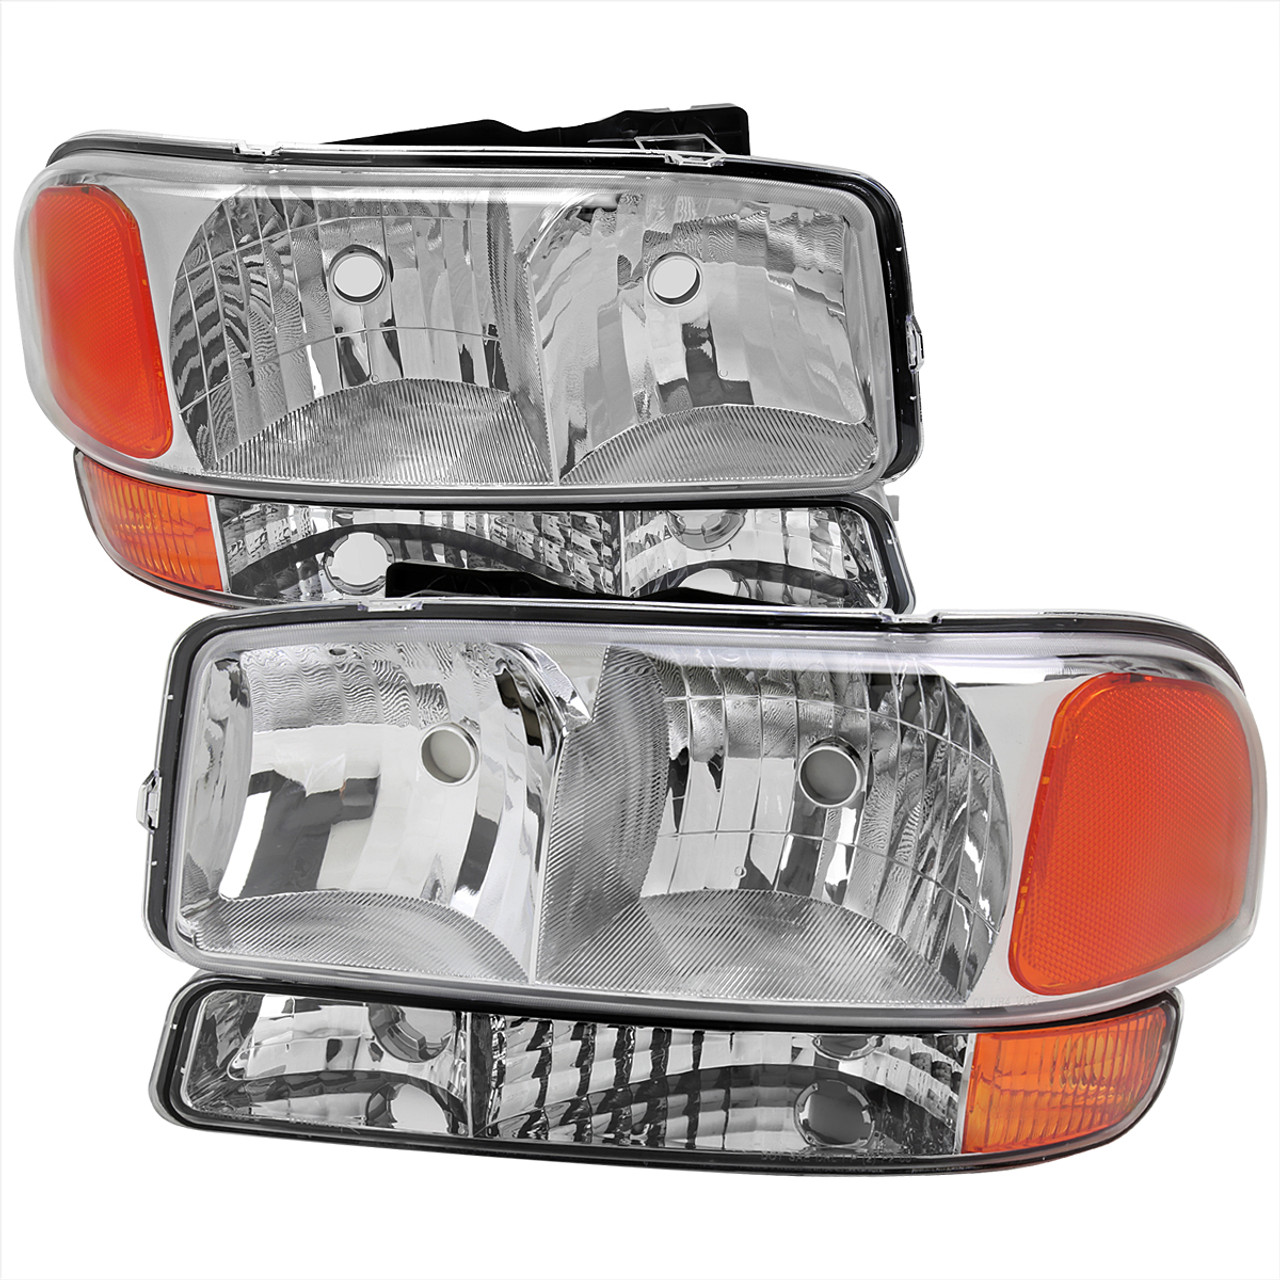 1999-2006 GMC Sierra/2007 Sierra Classic/2000-2006 Yukon/XL Factory Style  Headlights and Bumper Lights with Amber Reflector (Chrome Housing/Clear Lens)  - Spec-D Tuning